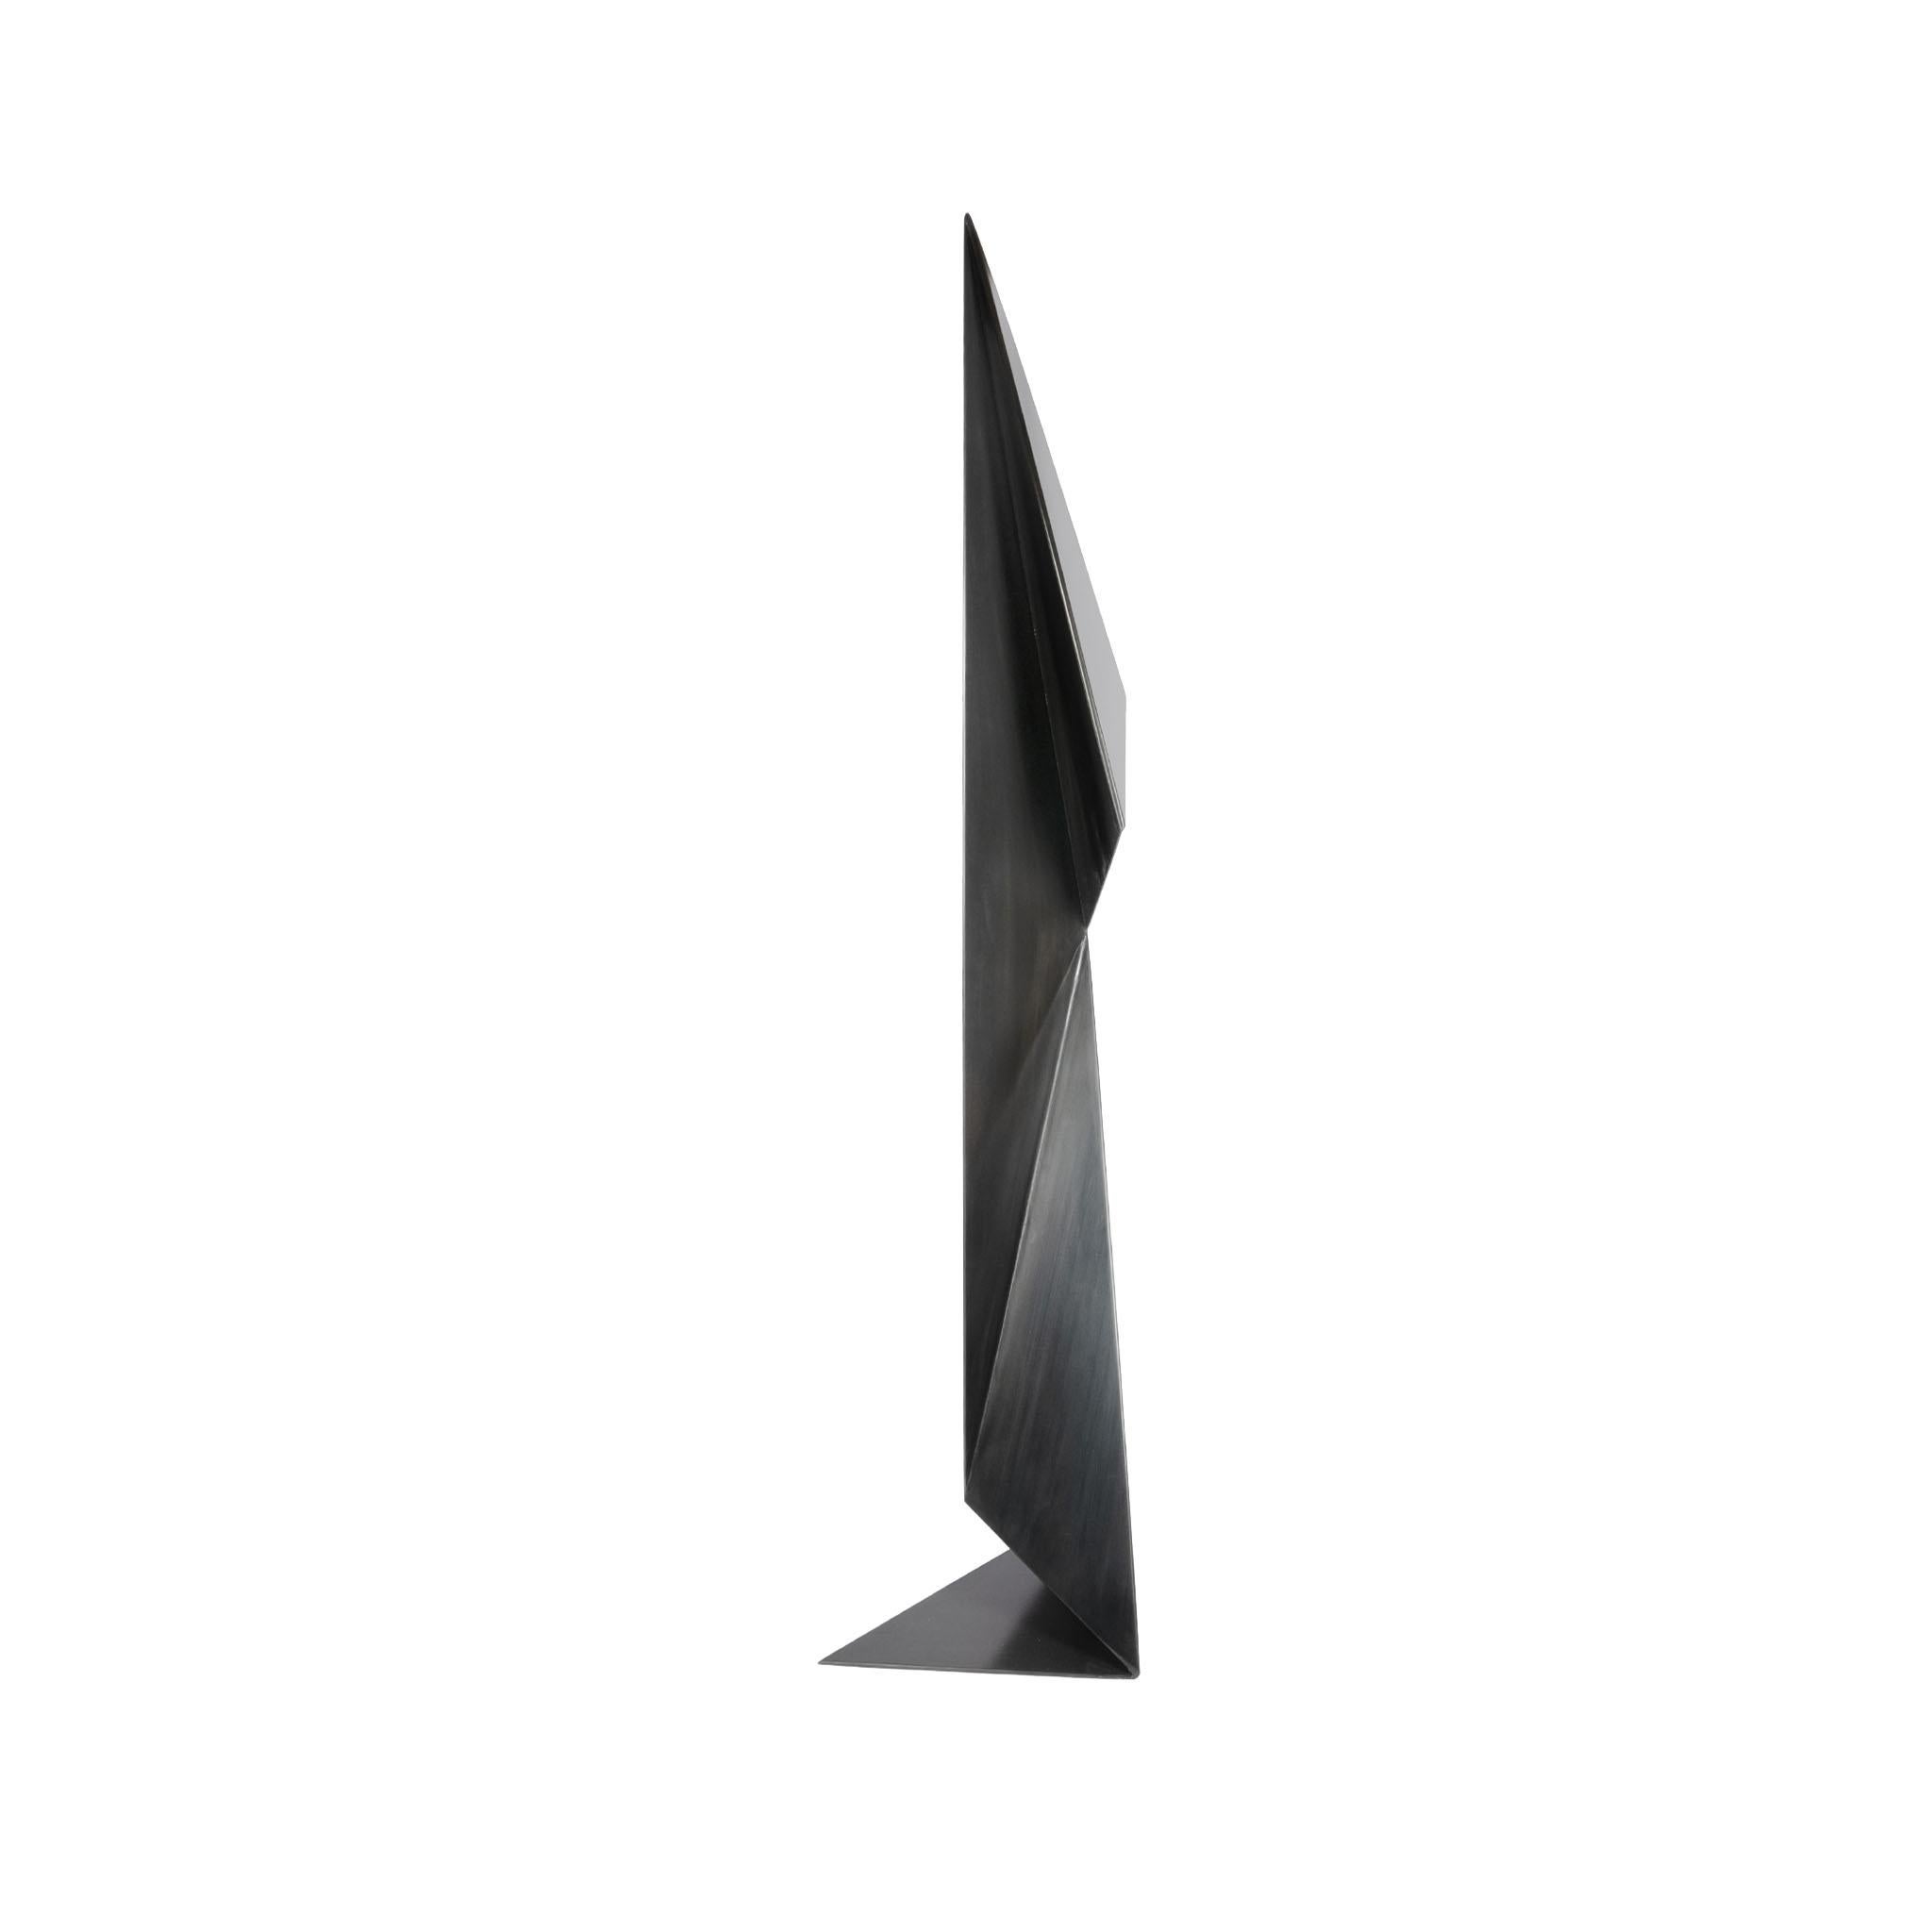 American Tall Abstract Origami Art Metal Sculpture Figure in a Hand Blackened Finish For Sale